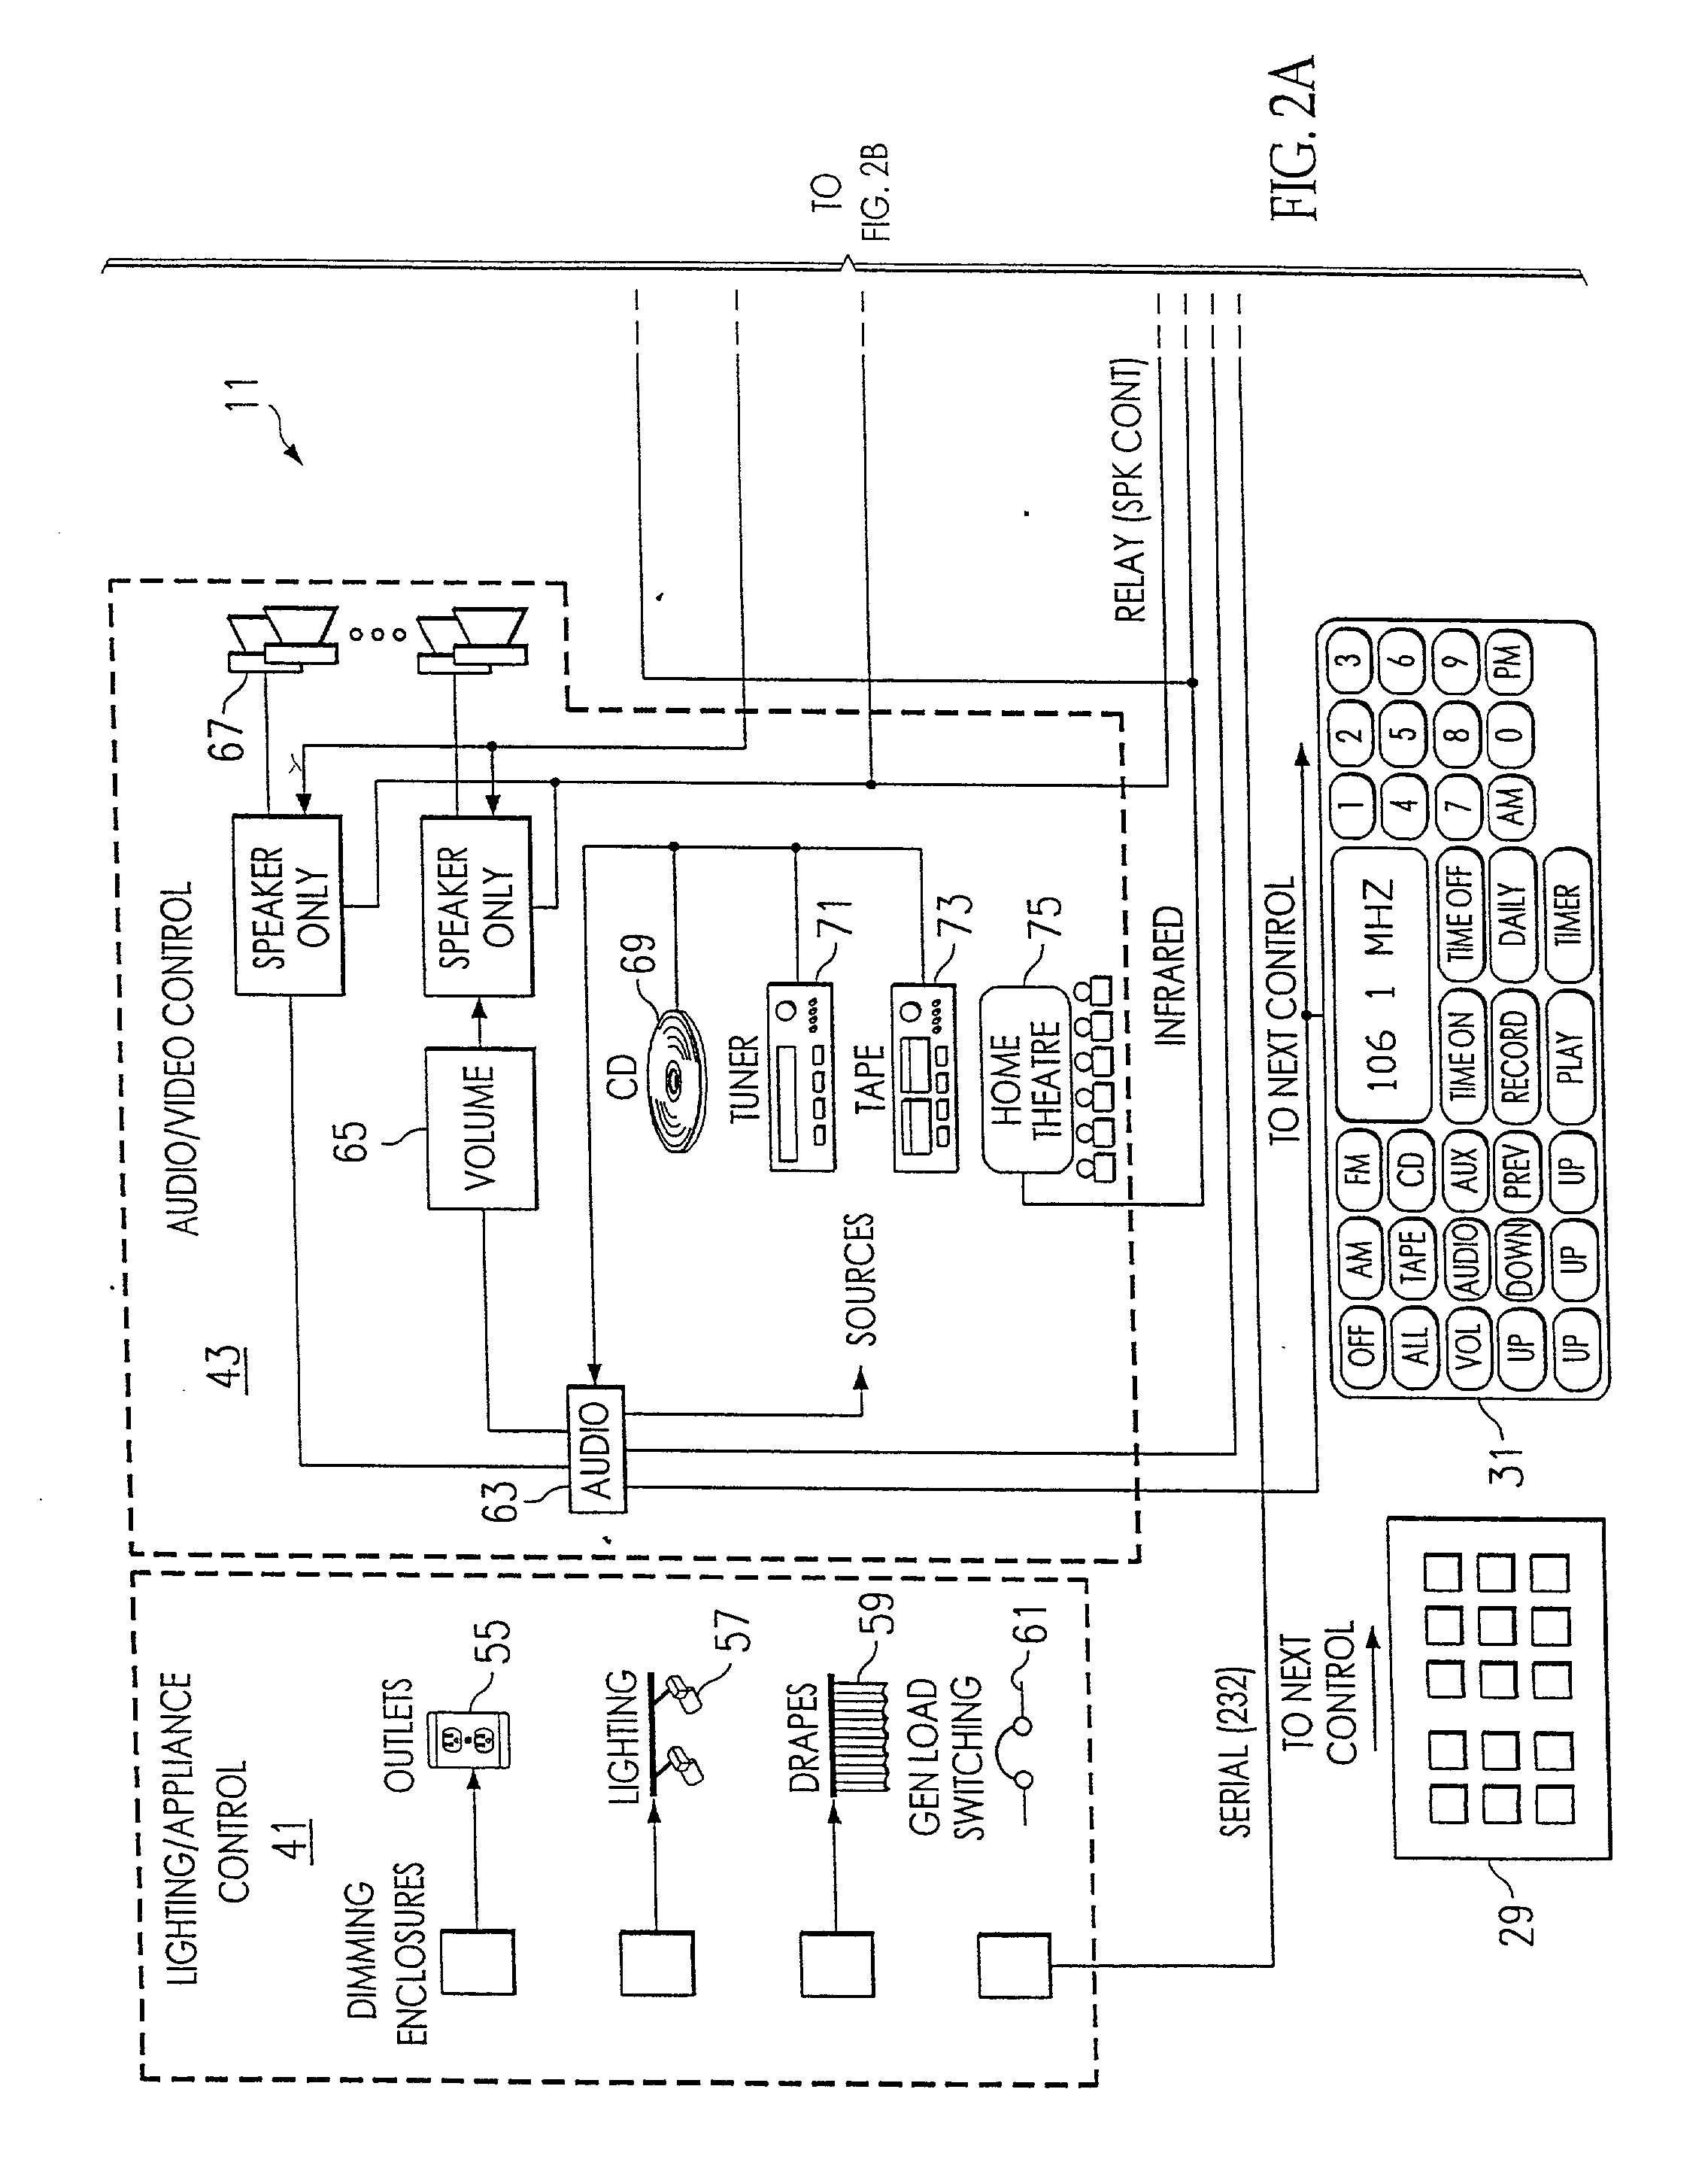 Method and apparatus for improved building automation